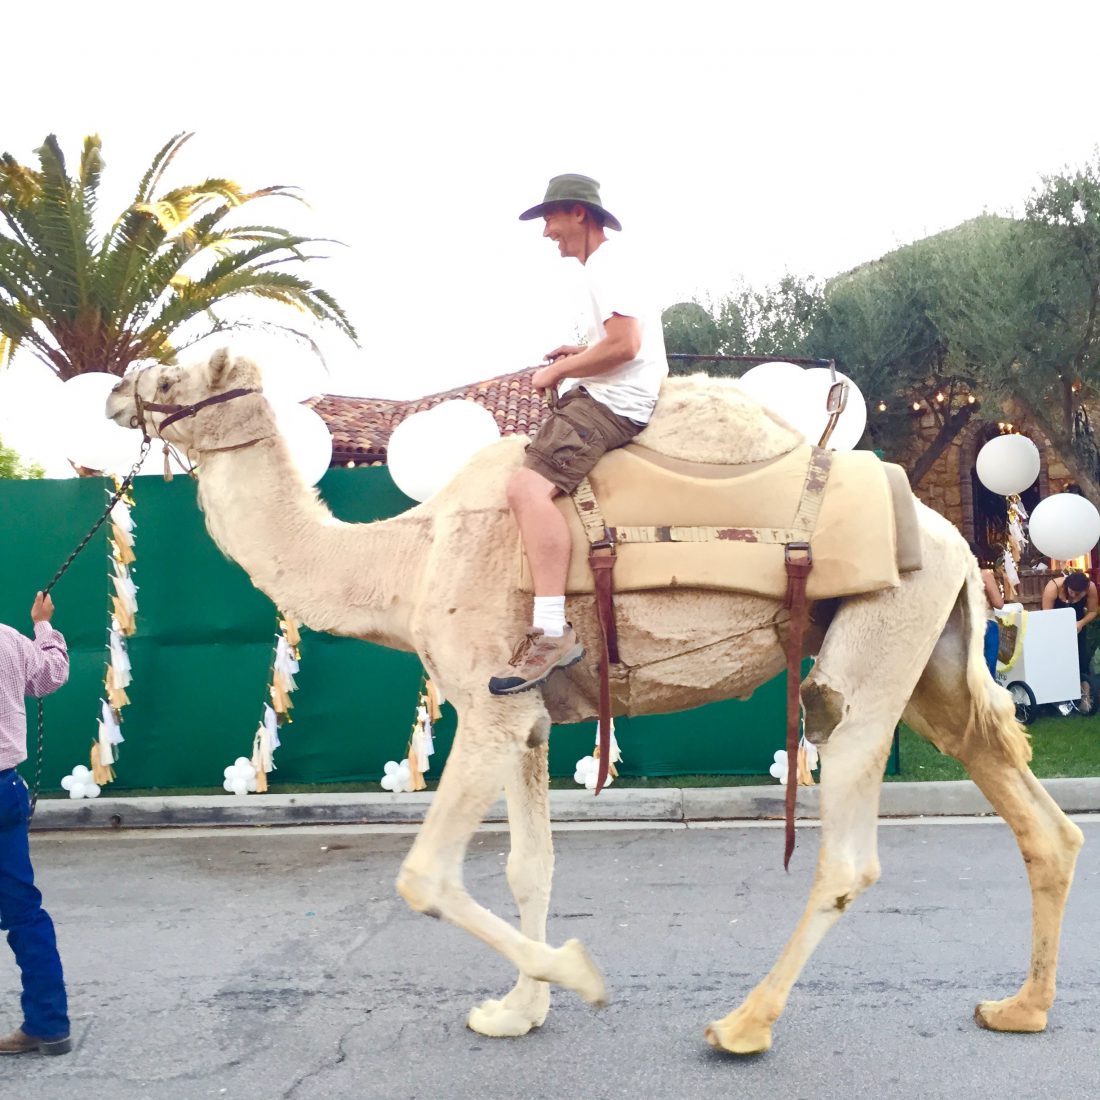 a man riding a live camel on a street with palm trees and balloons